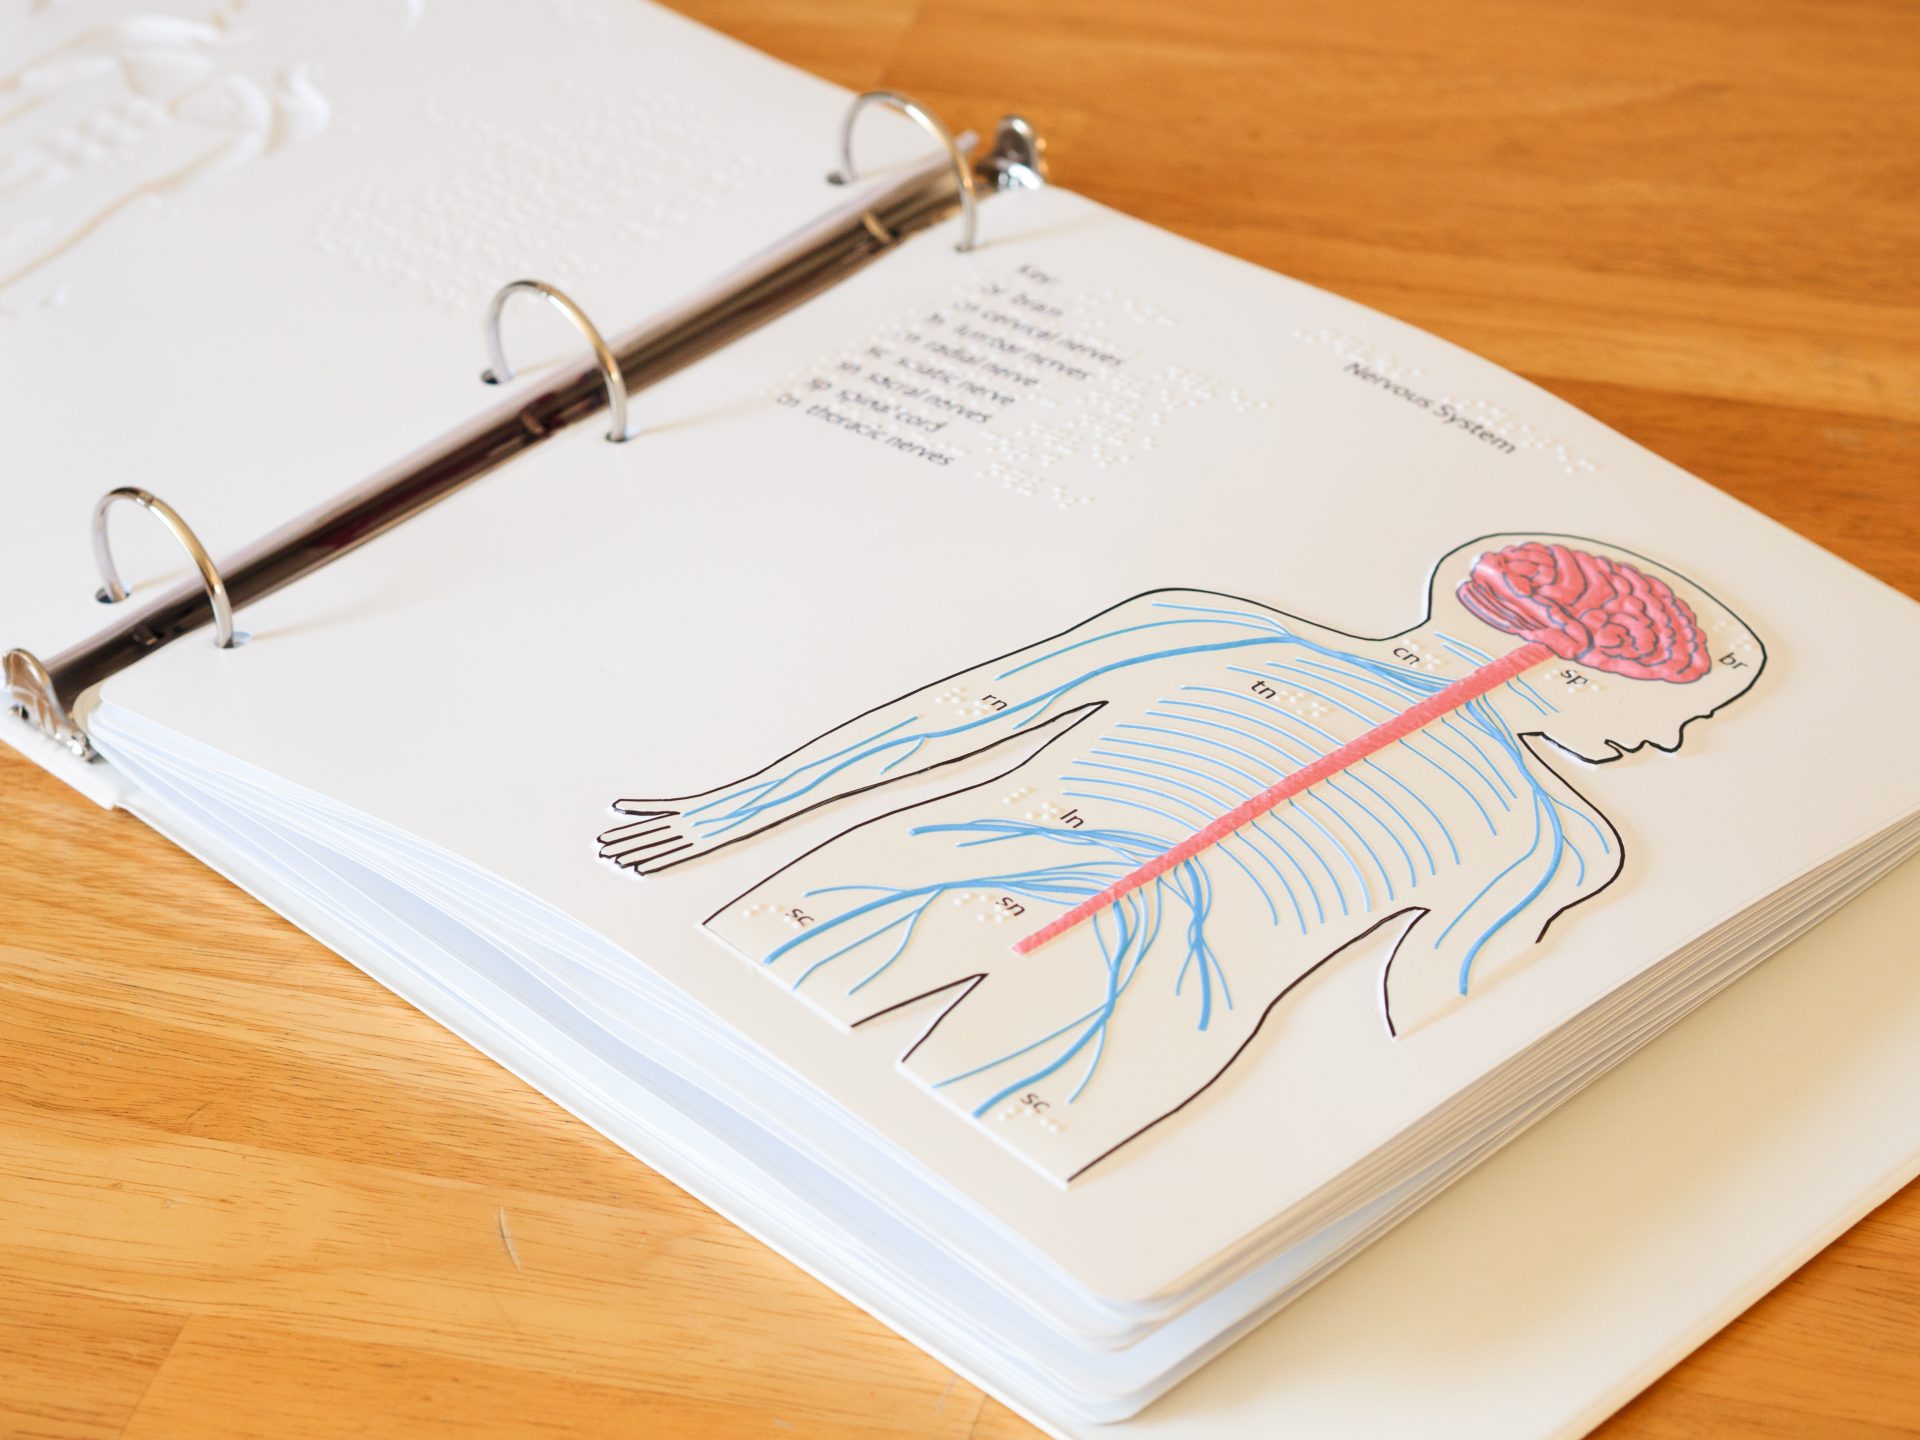 A binder open on a table top. A tactile graphic of the nervous system can be seen with text and braille labels.